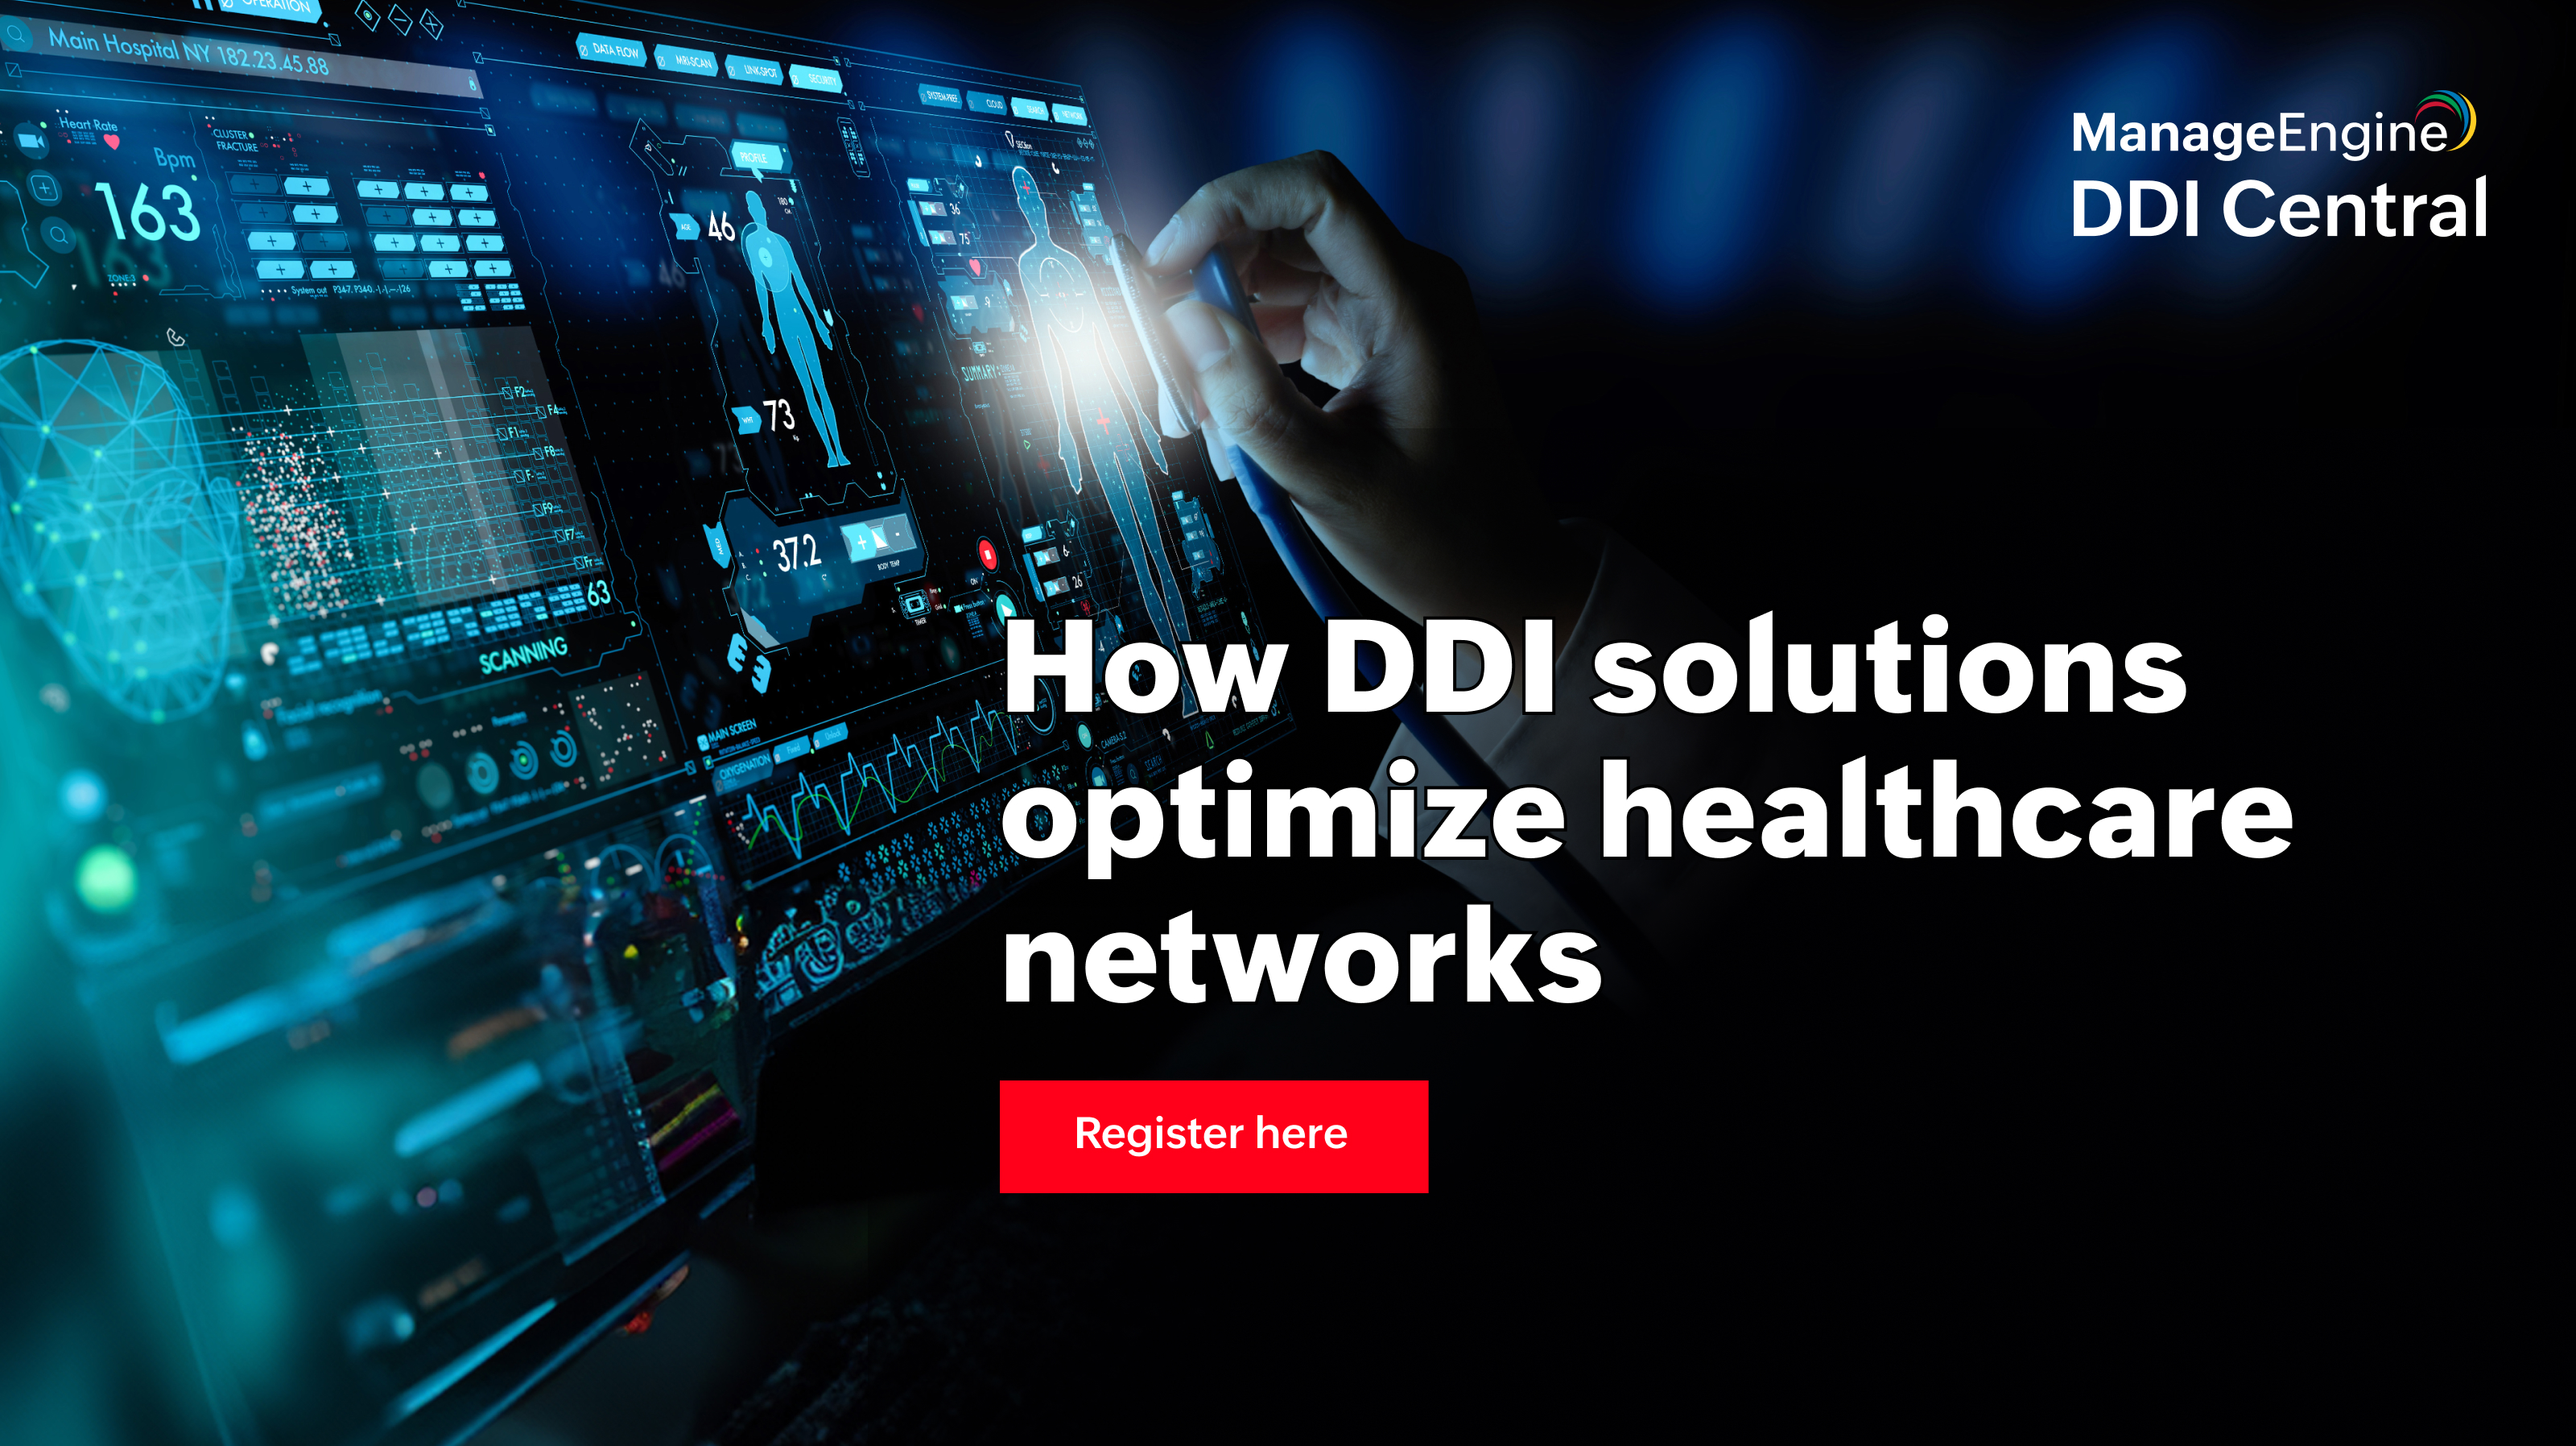 DDI solutions for healthcare networks ManageEngine DDI Central